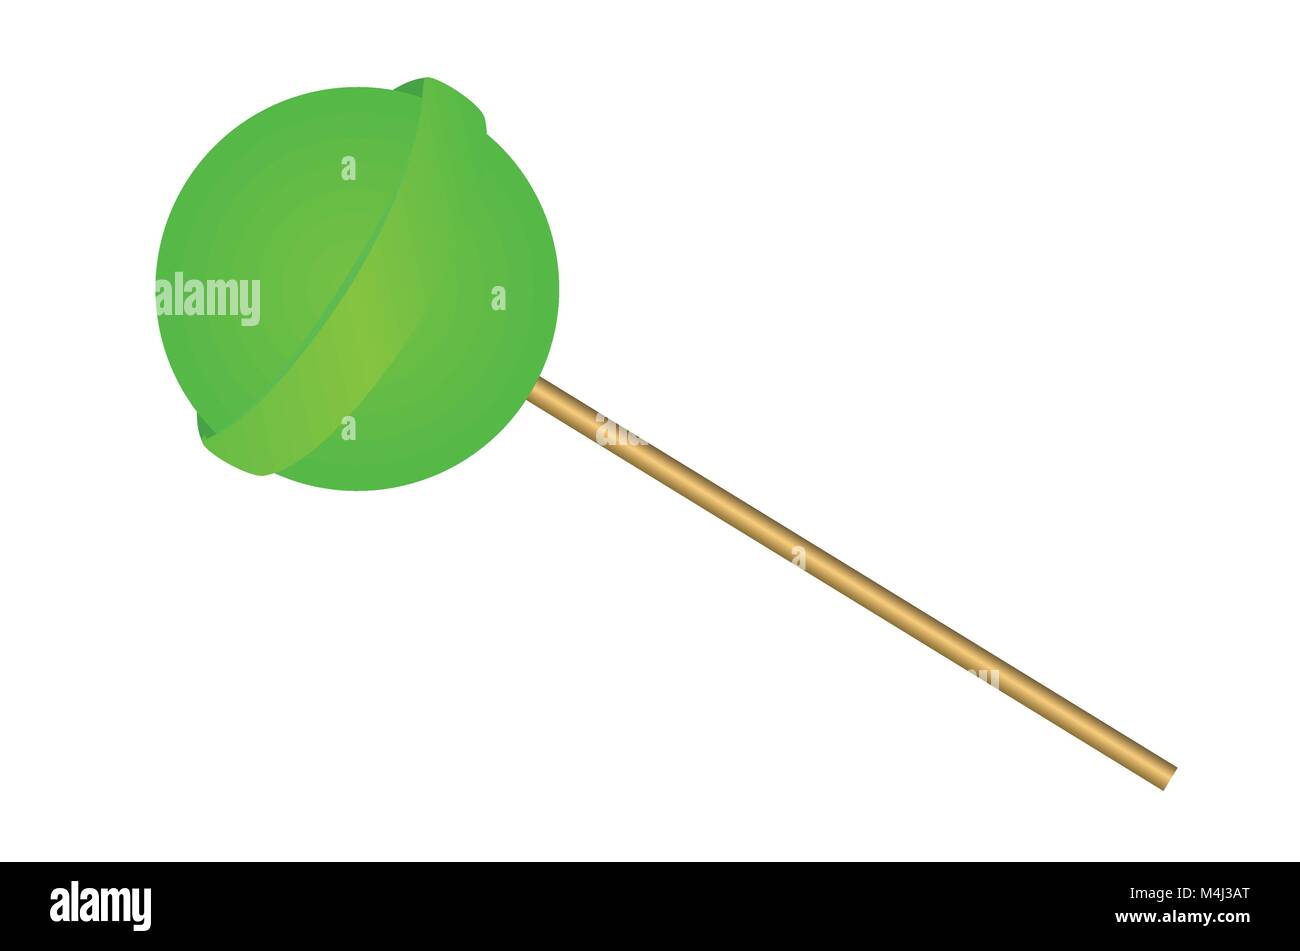 Illustration of green unwrapped lime lolly, vector of fruit lolly/ hard handy on stick/ lollipop/ sucker/ lollypop/  candy/ sweets/ fruit lollipop Stock Vector